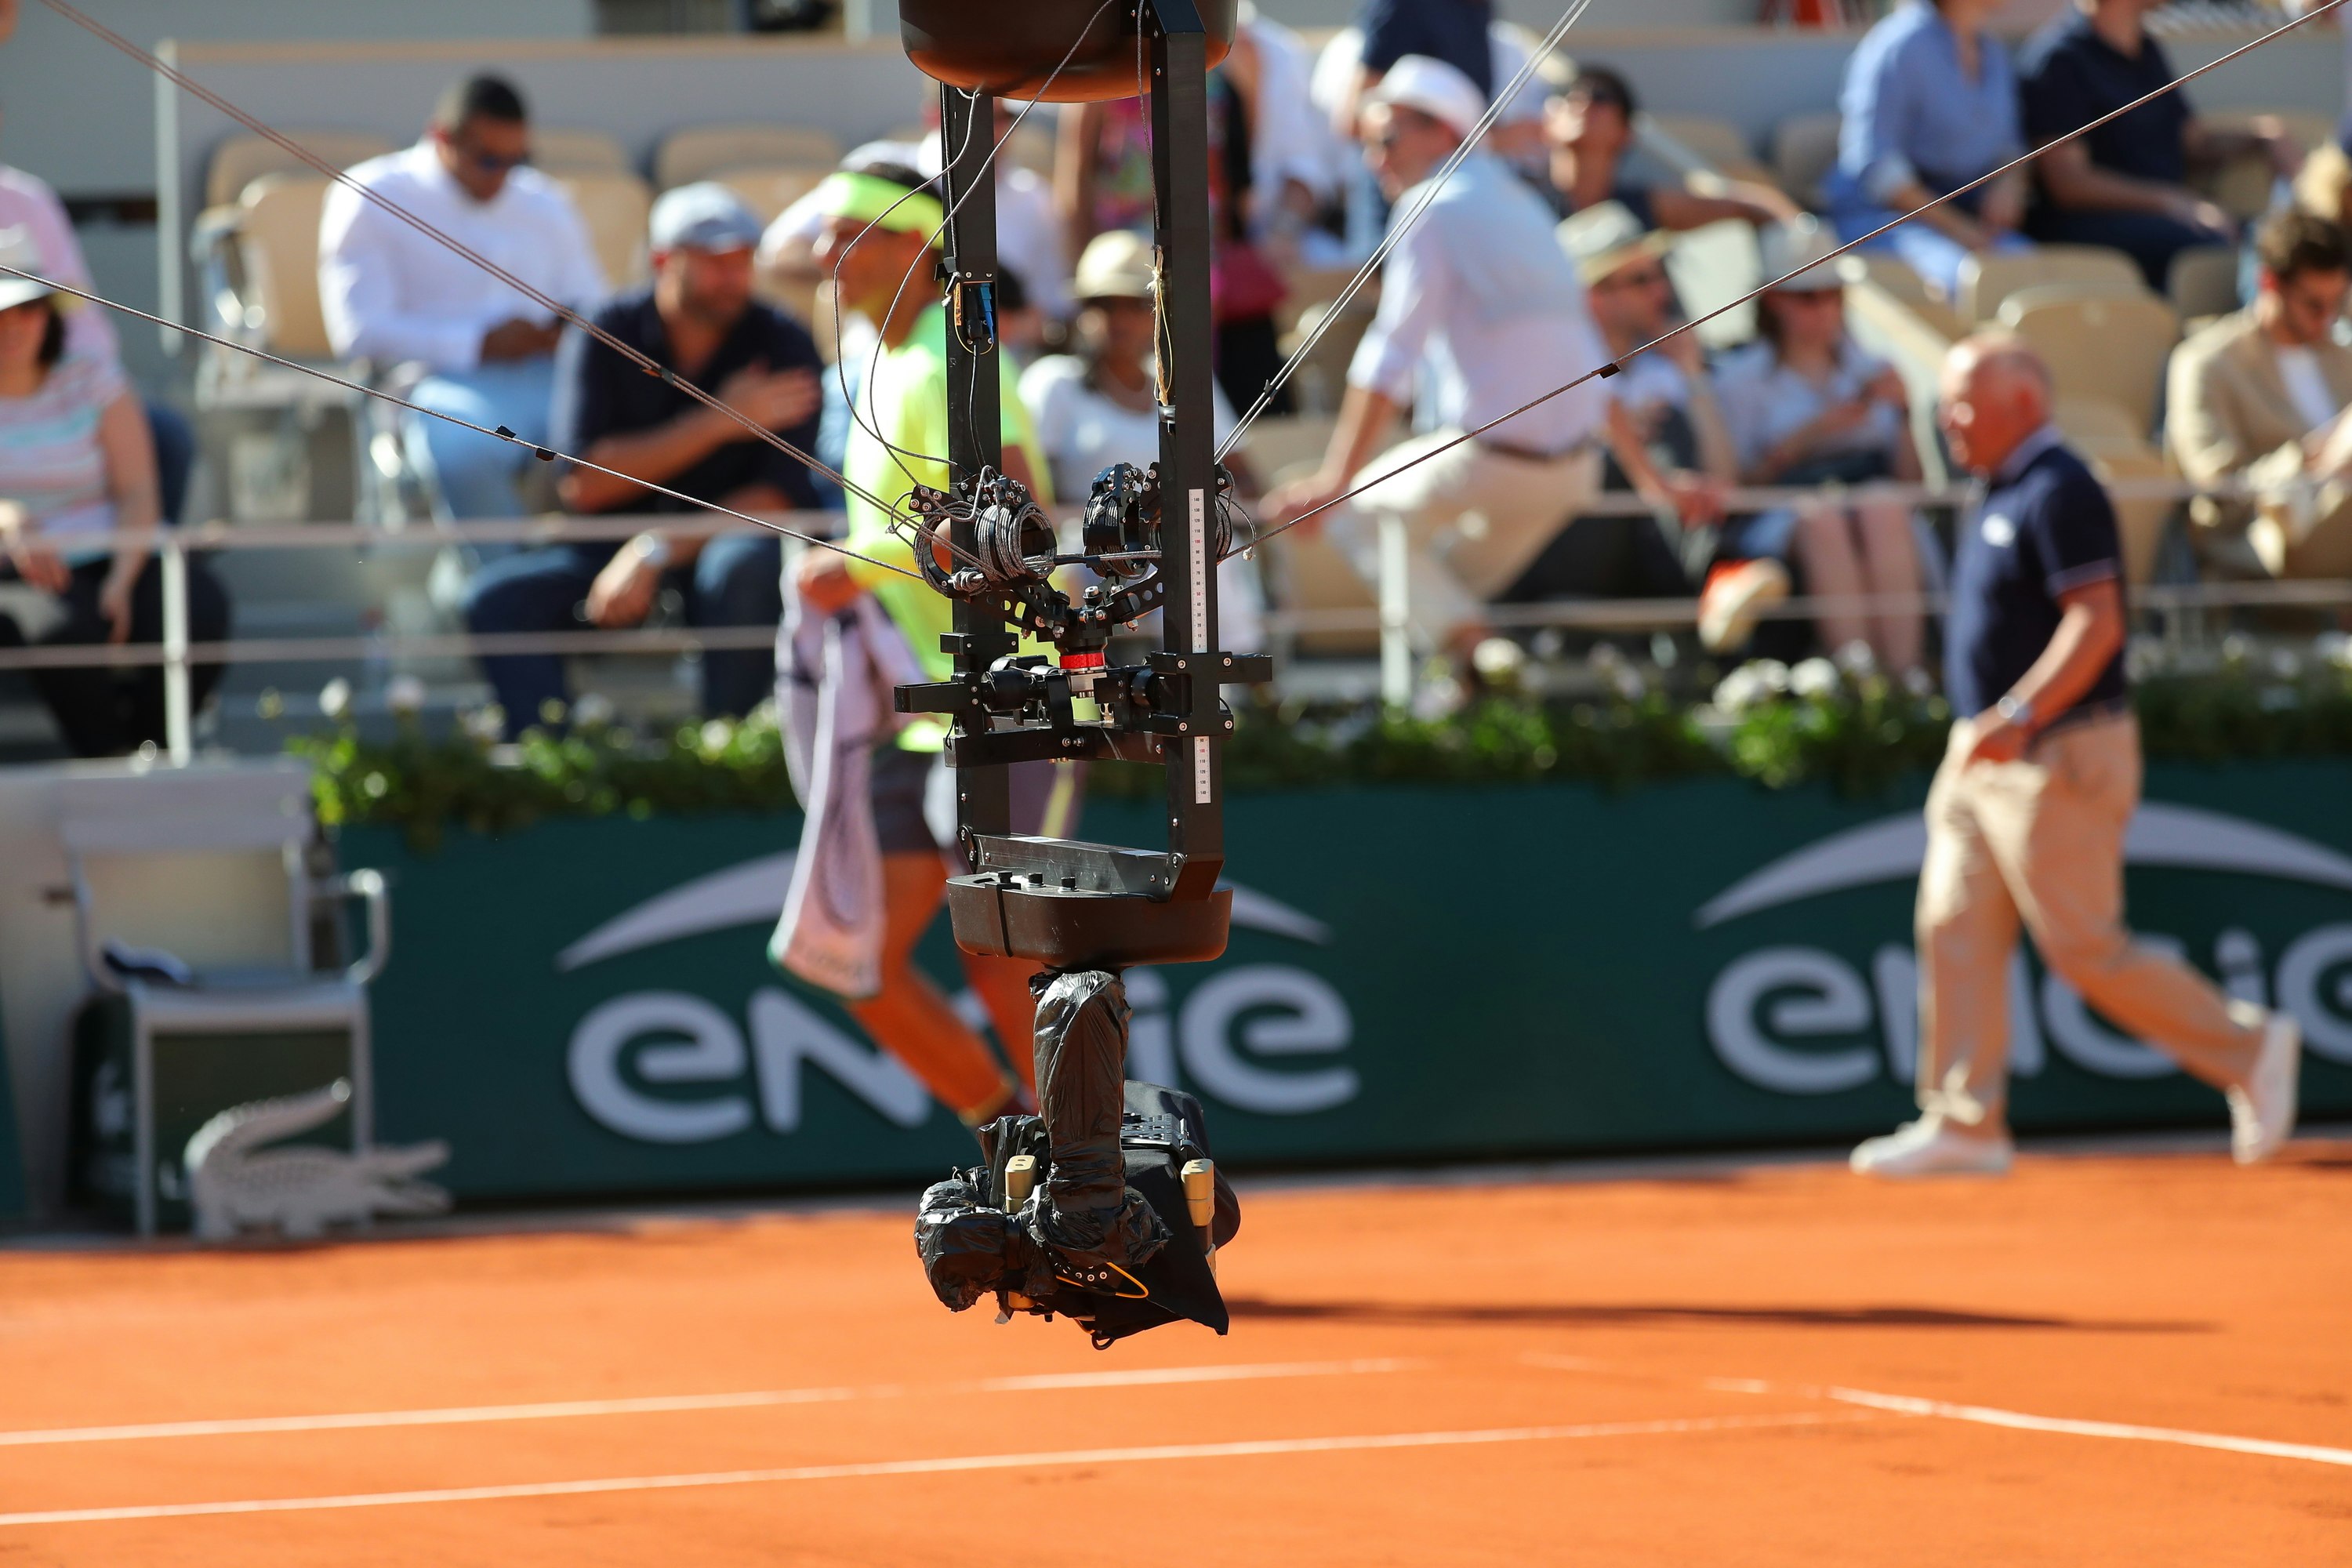 Roland-Garros Broadcasting rights for France awarded to France Televisions and Amazon - Roland-Garros